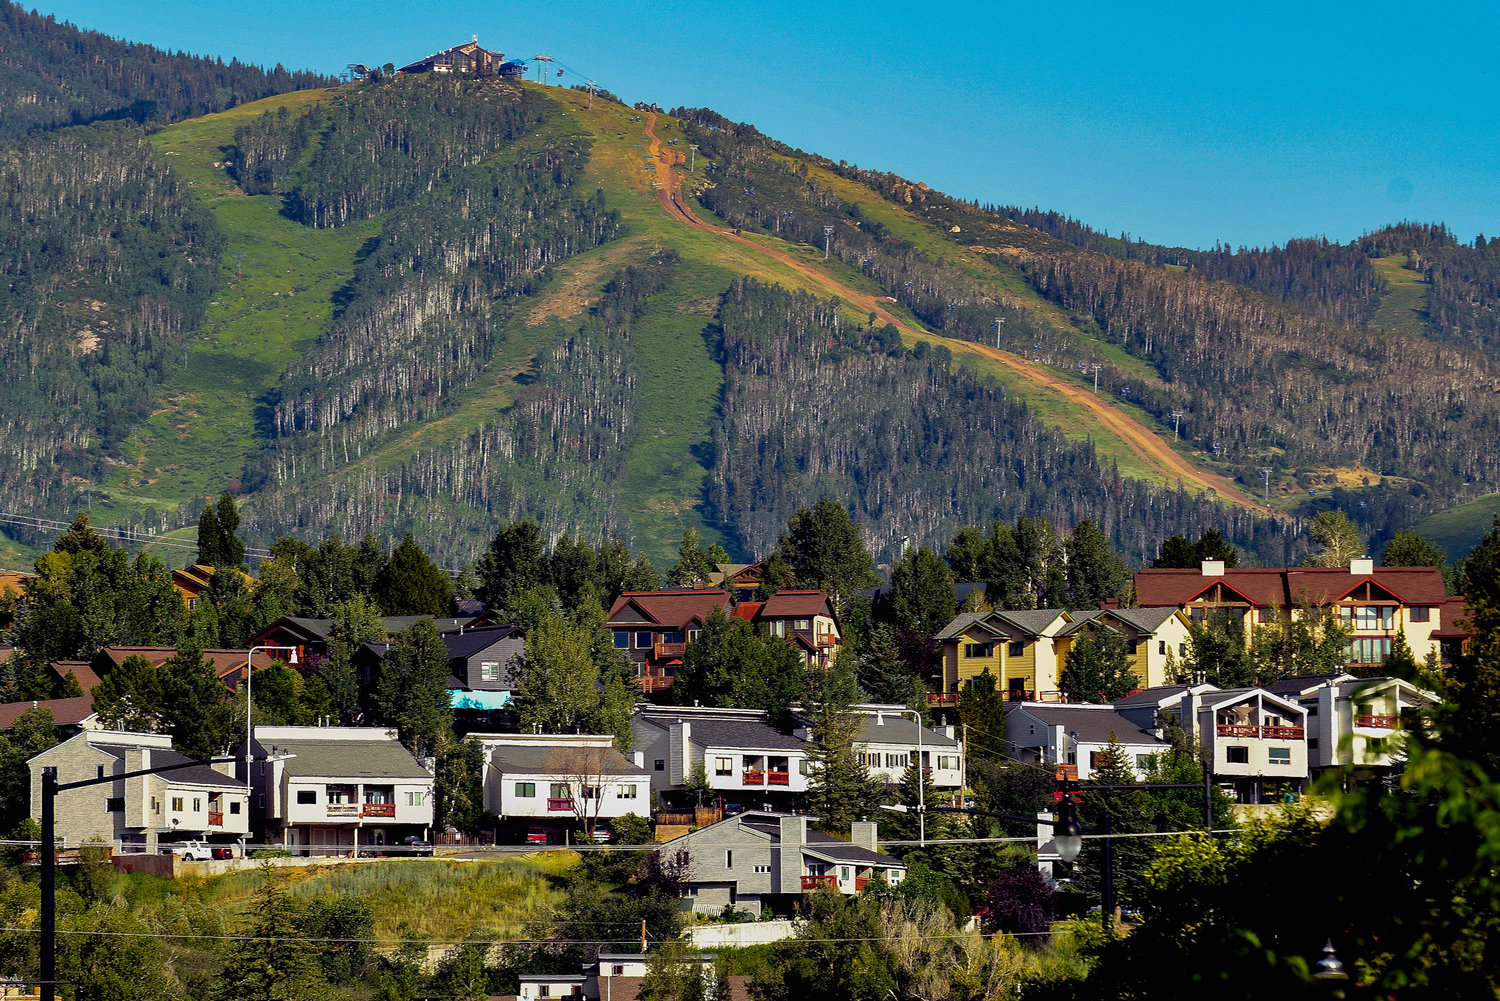 Houses dot the landscape at Colorado's Steamboat Ski Resort, Wednesday, Aug. 3, 2022, in Steamboat Springs, Colo. The city council passed a rule in June that could prove to be a model for other vacation towns: A ban on new short-term rentals in most of the city and a ballot measure to tax bookings at 9% to fund affordable housing.